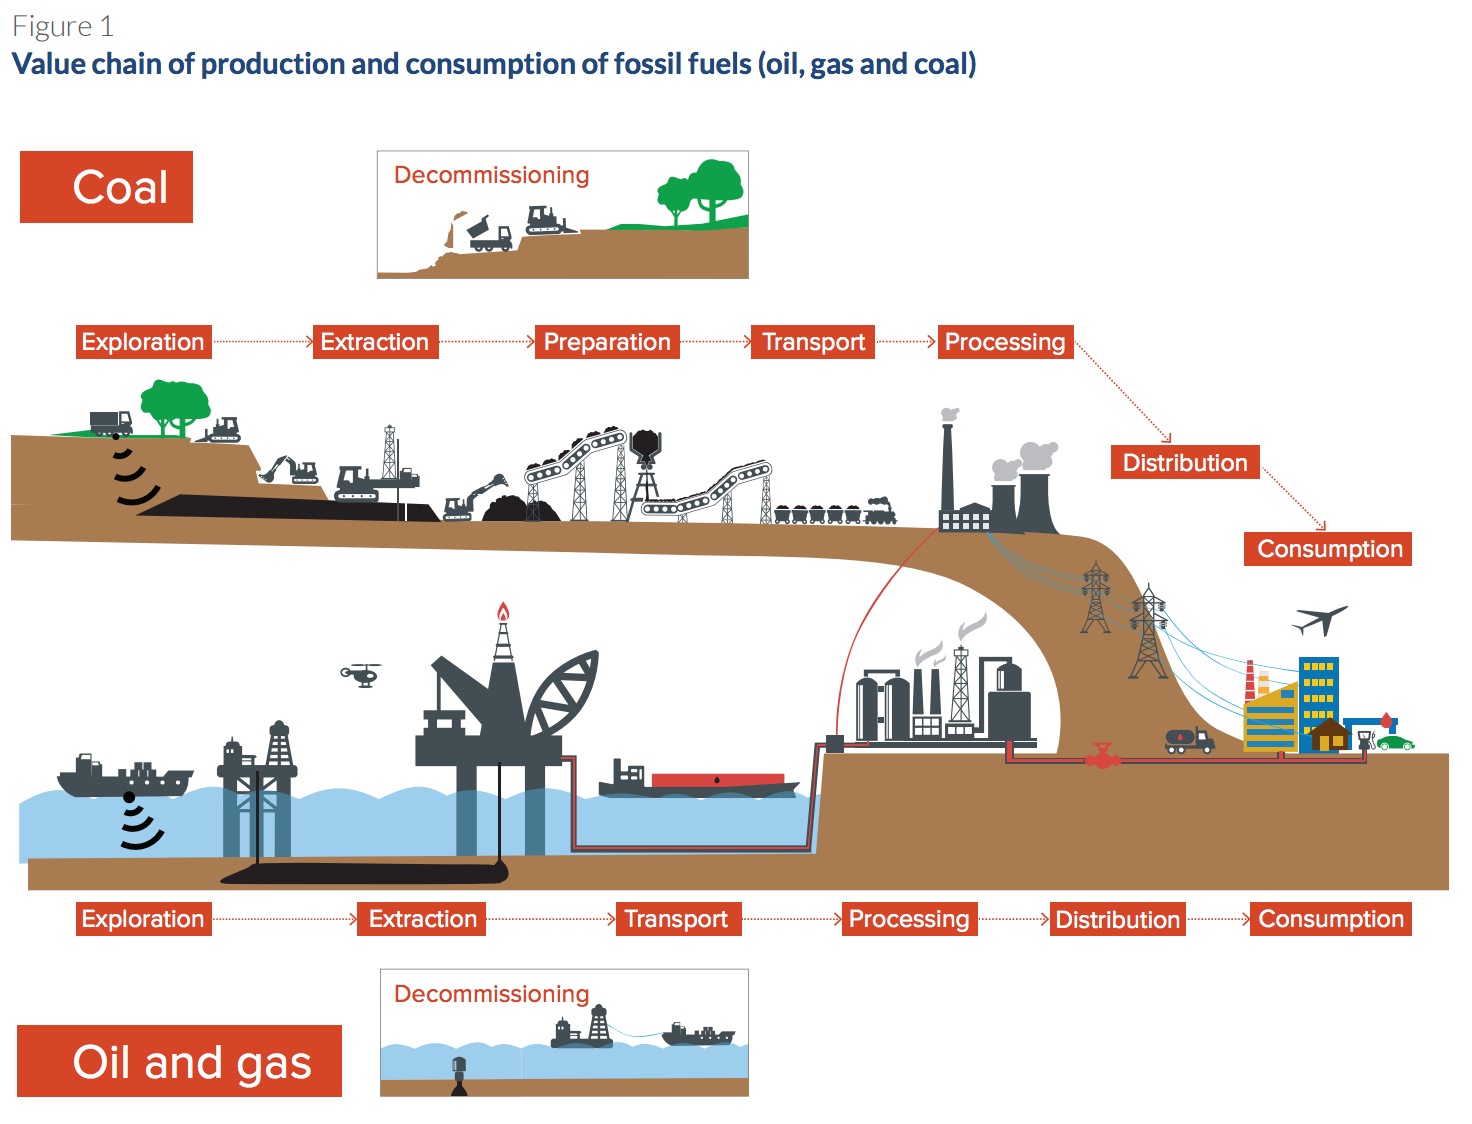 Value chain of production and consumption of fossil fuels (oil, gas and coal)